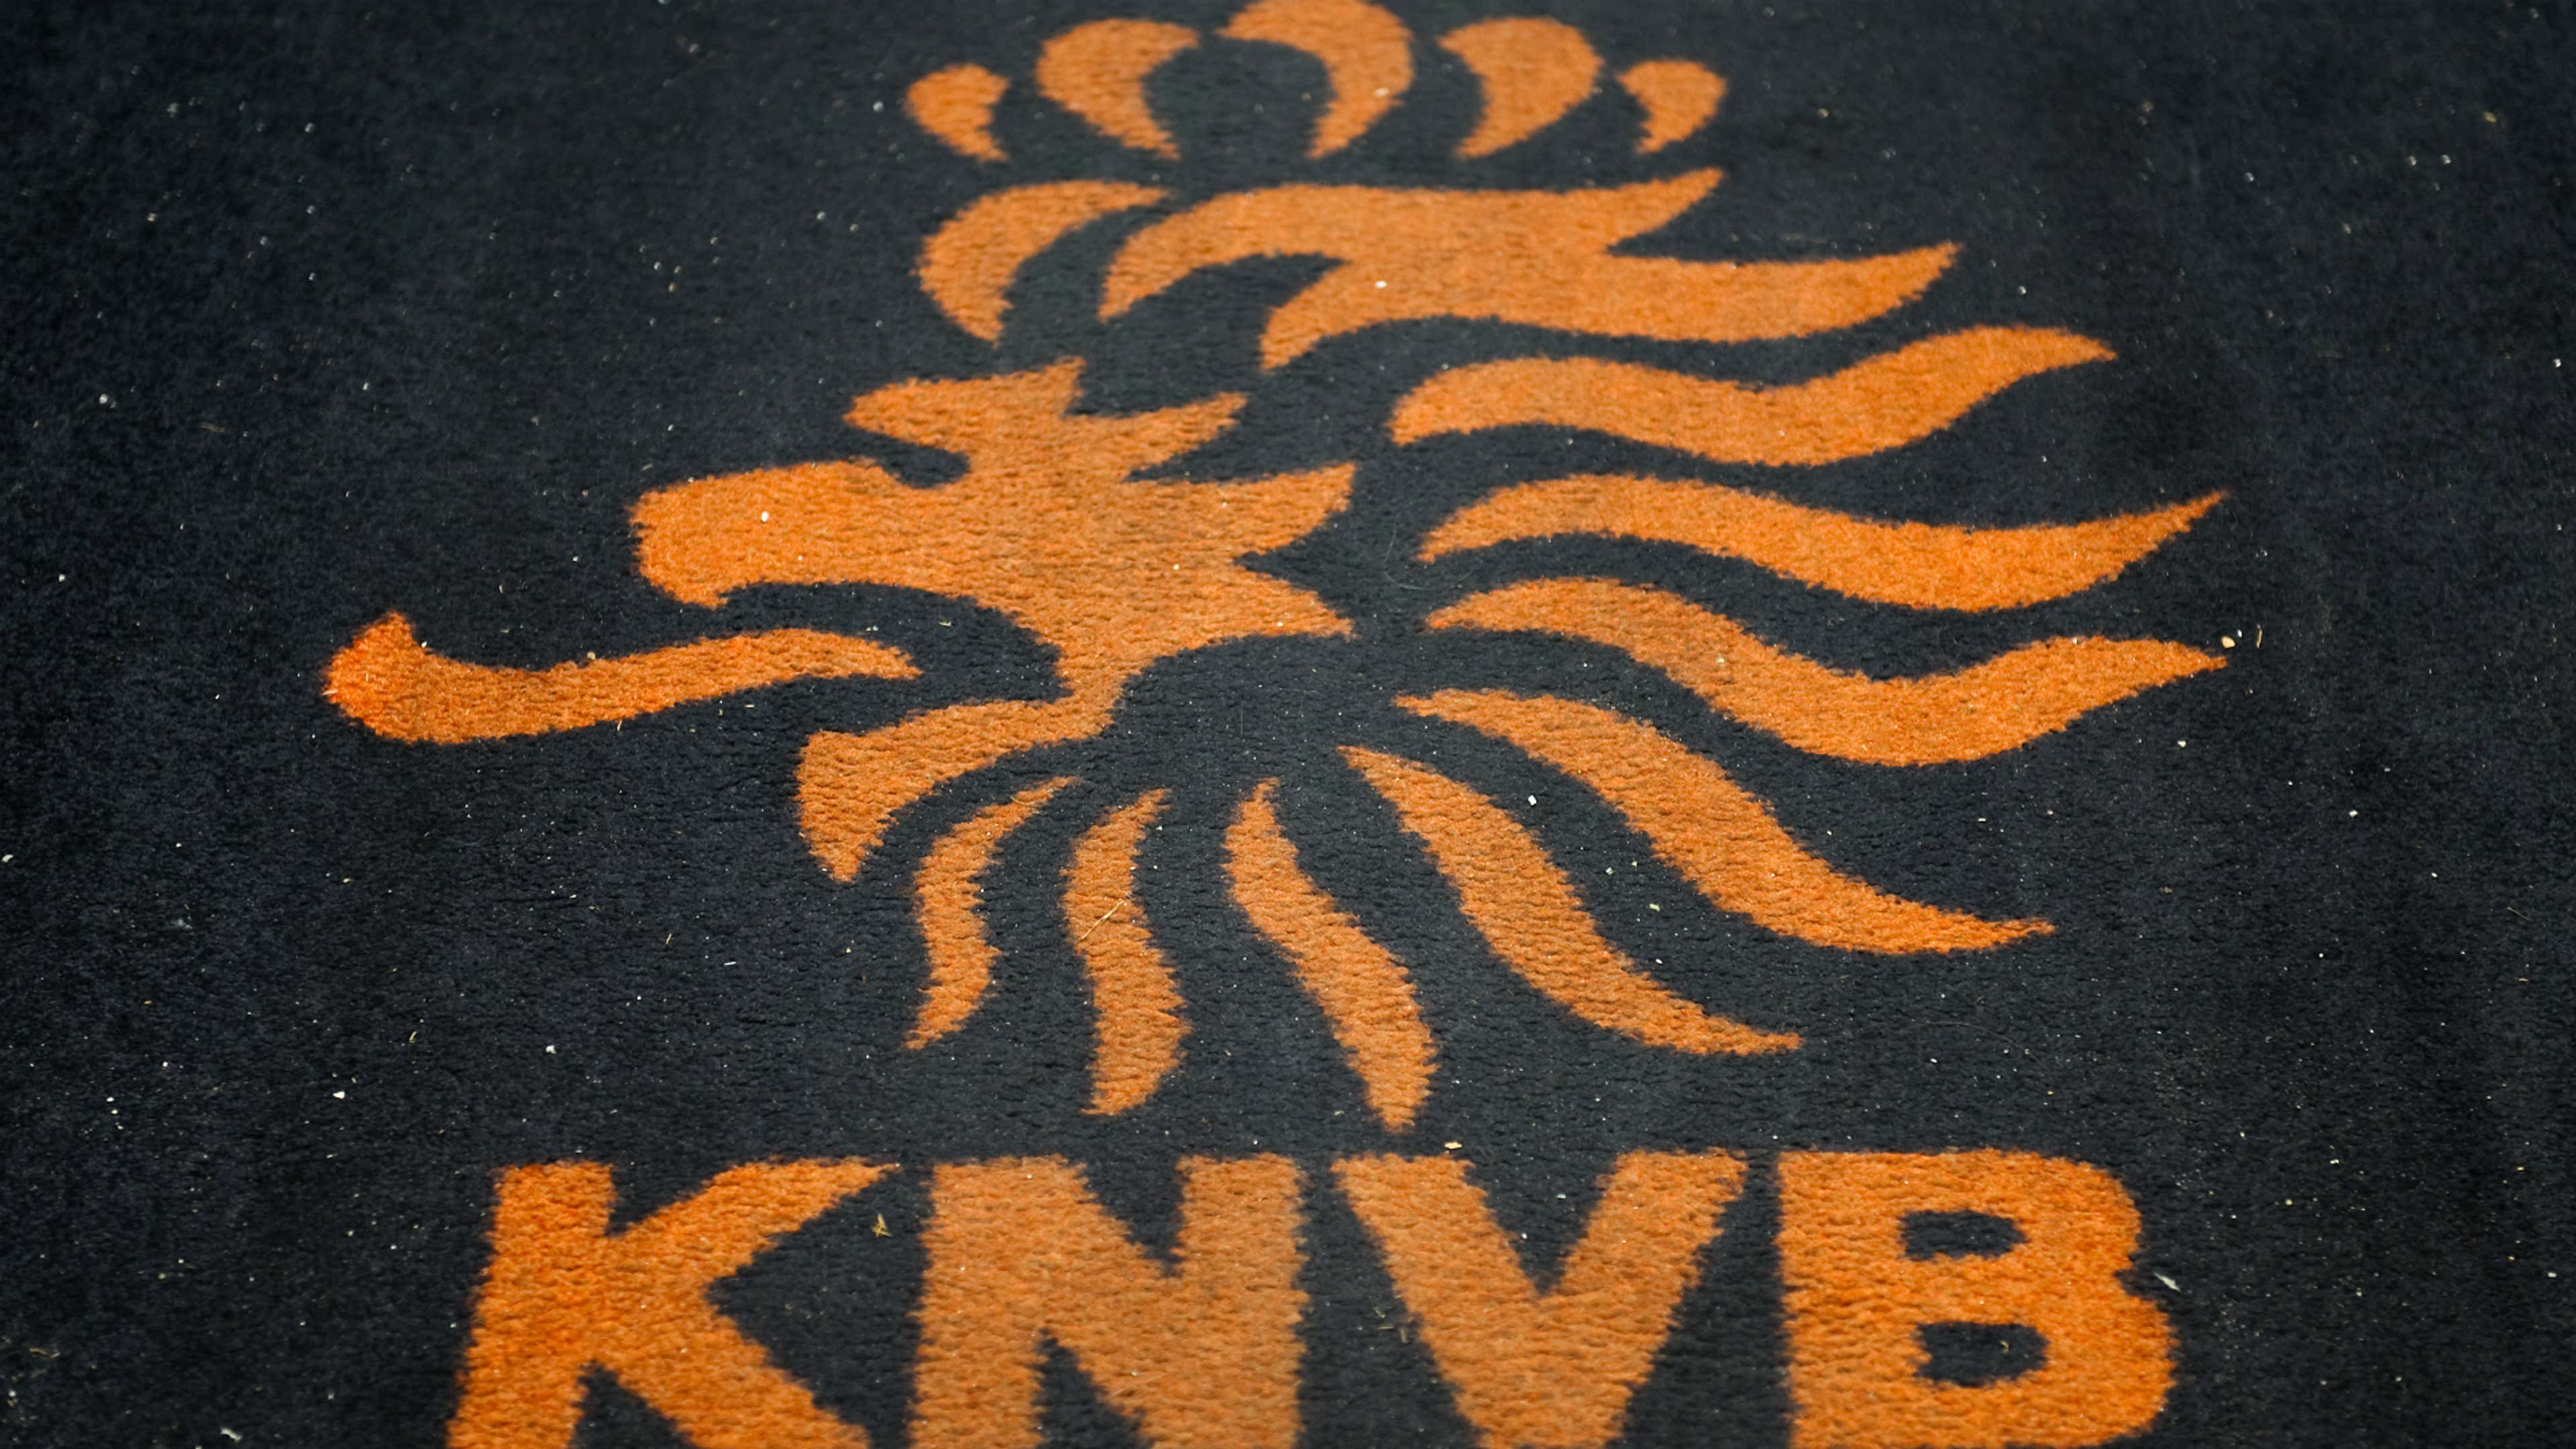 KNVB to investigate World Cup bid amid corruption claims